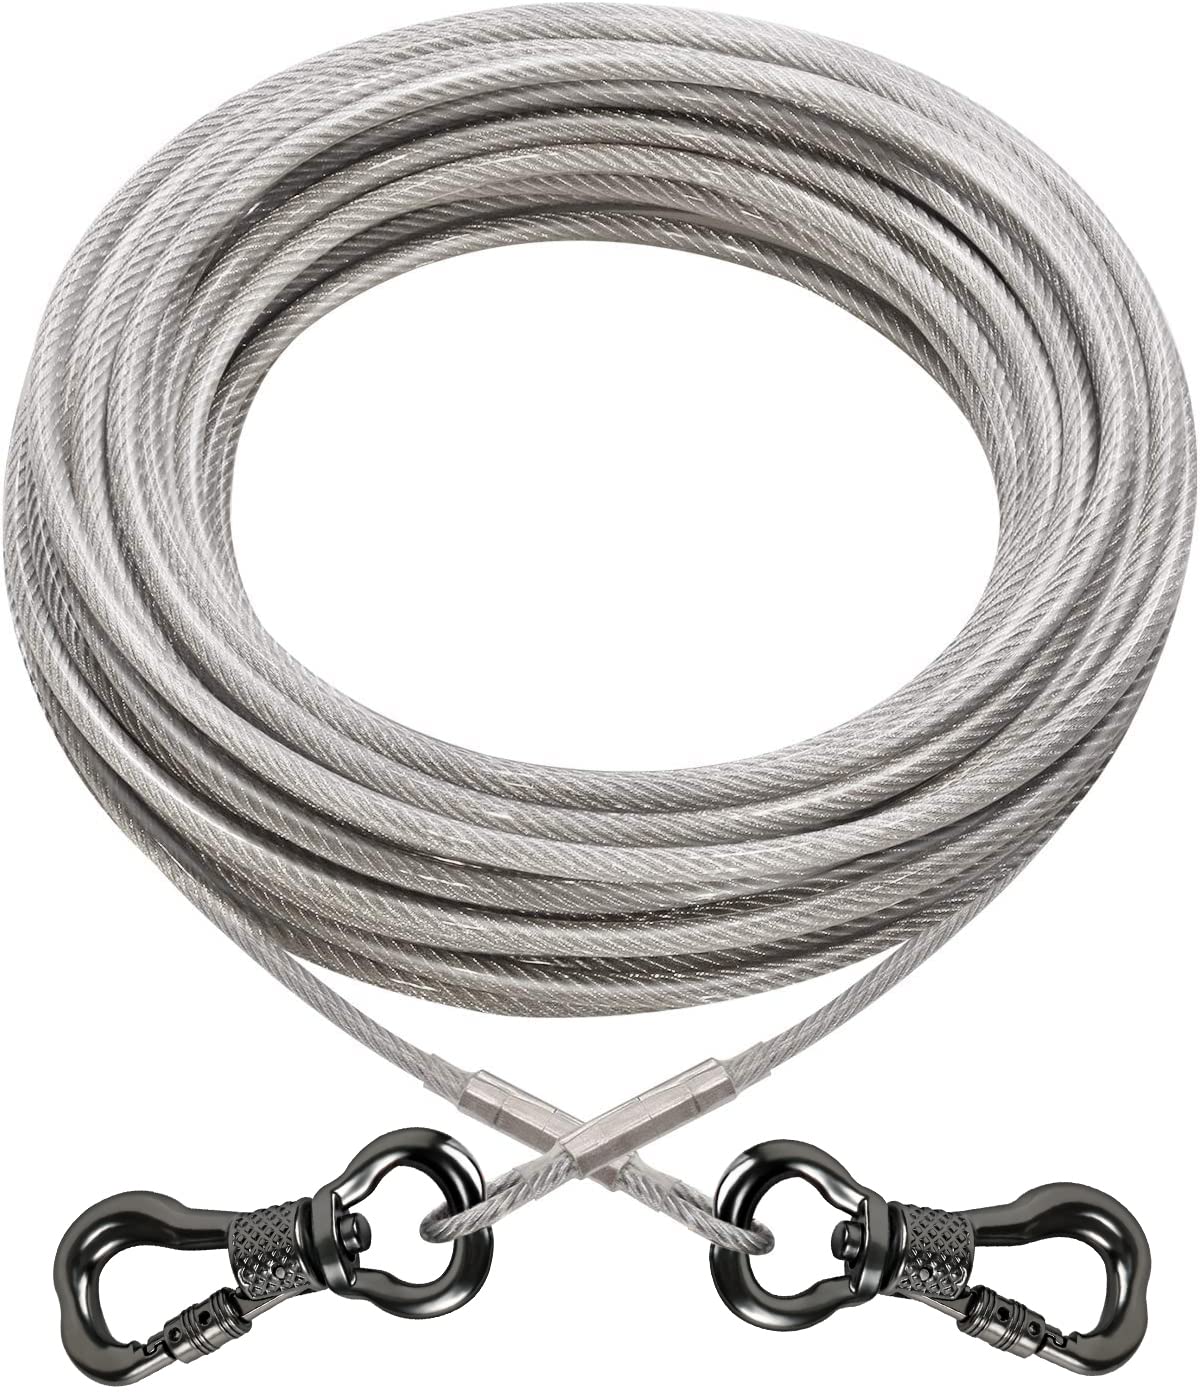 XiaZ Dog Runner Tie Out Cable for Dogs Up to 60/120/250 Pound